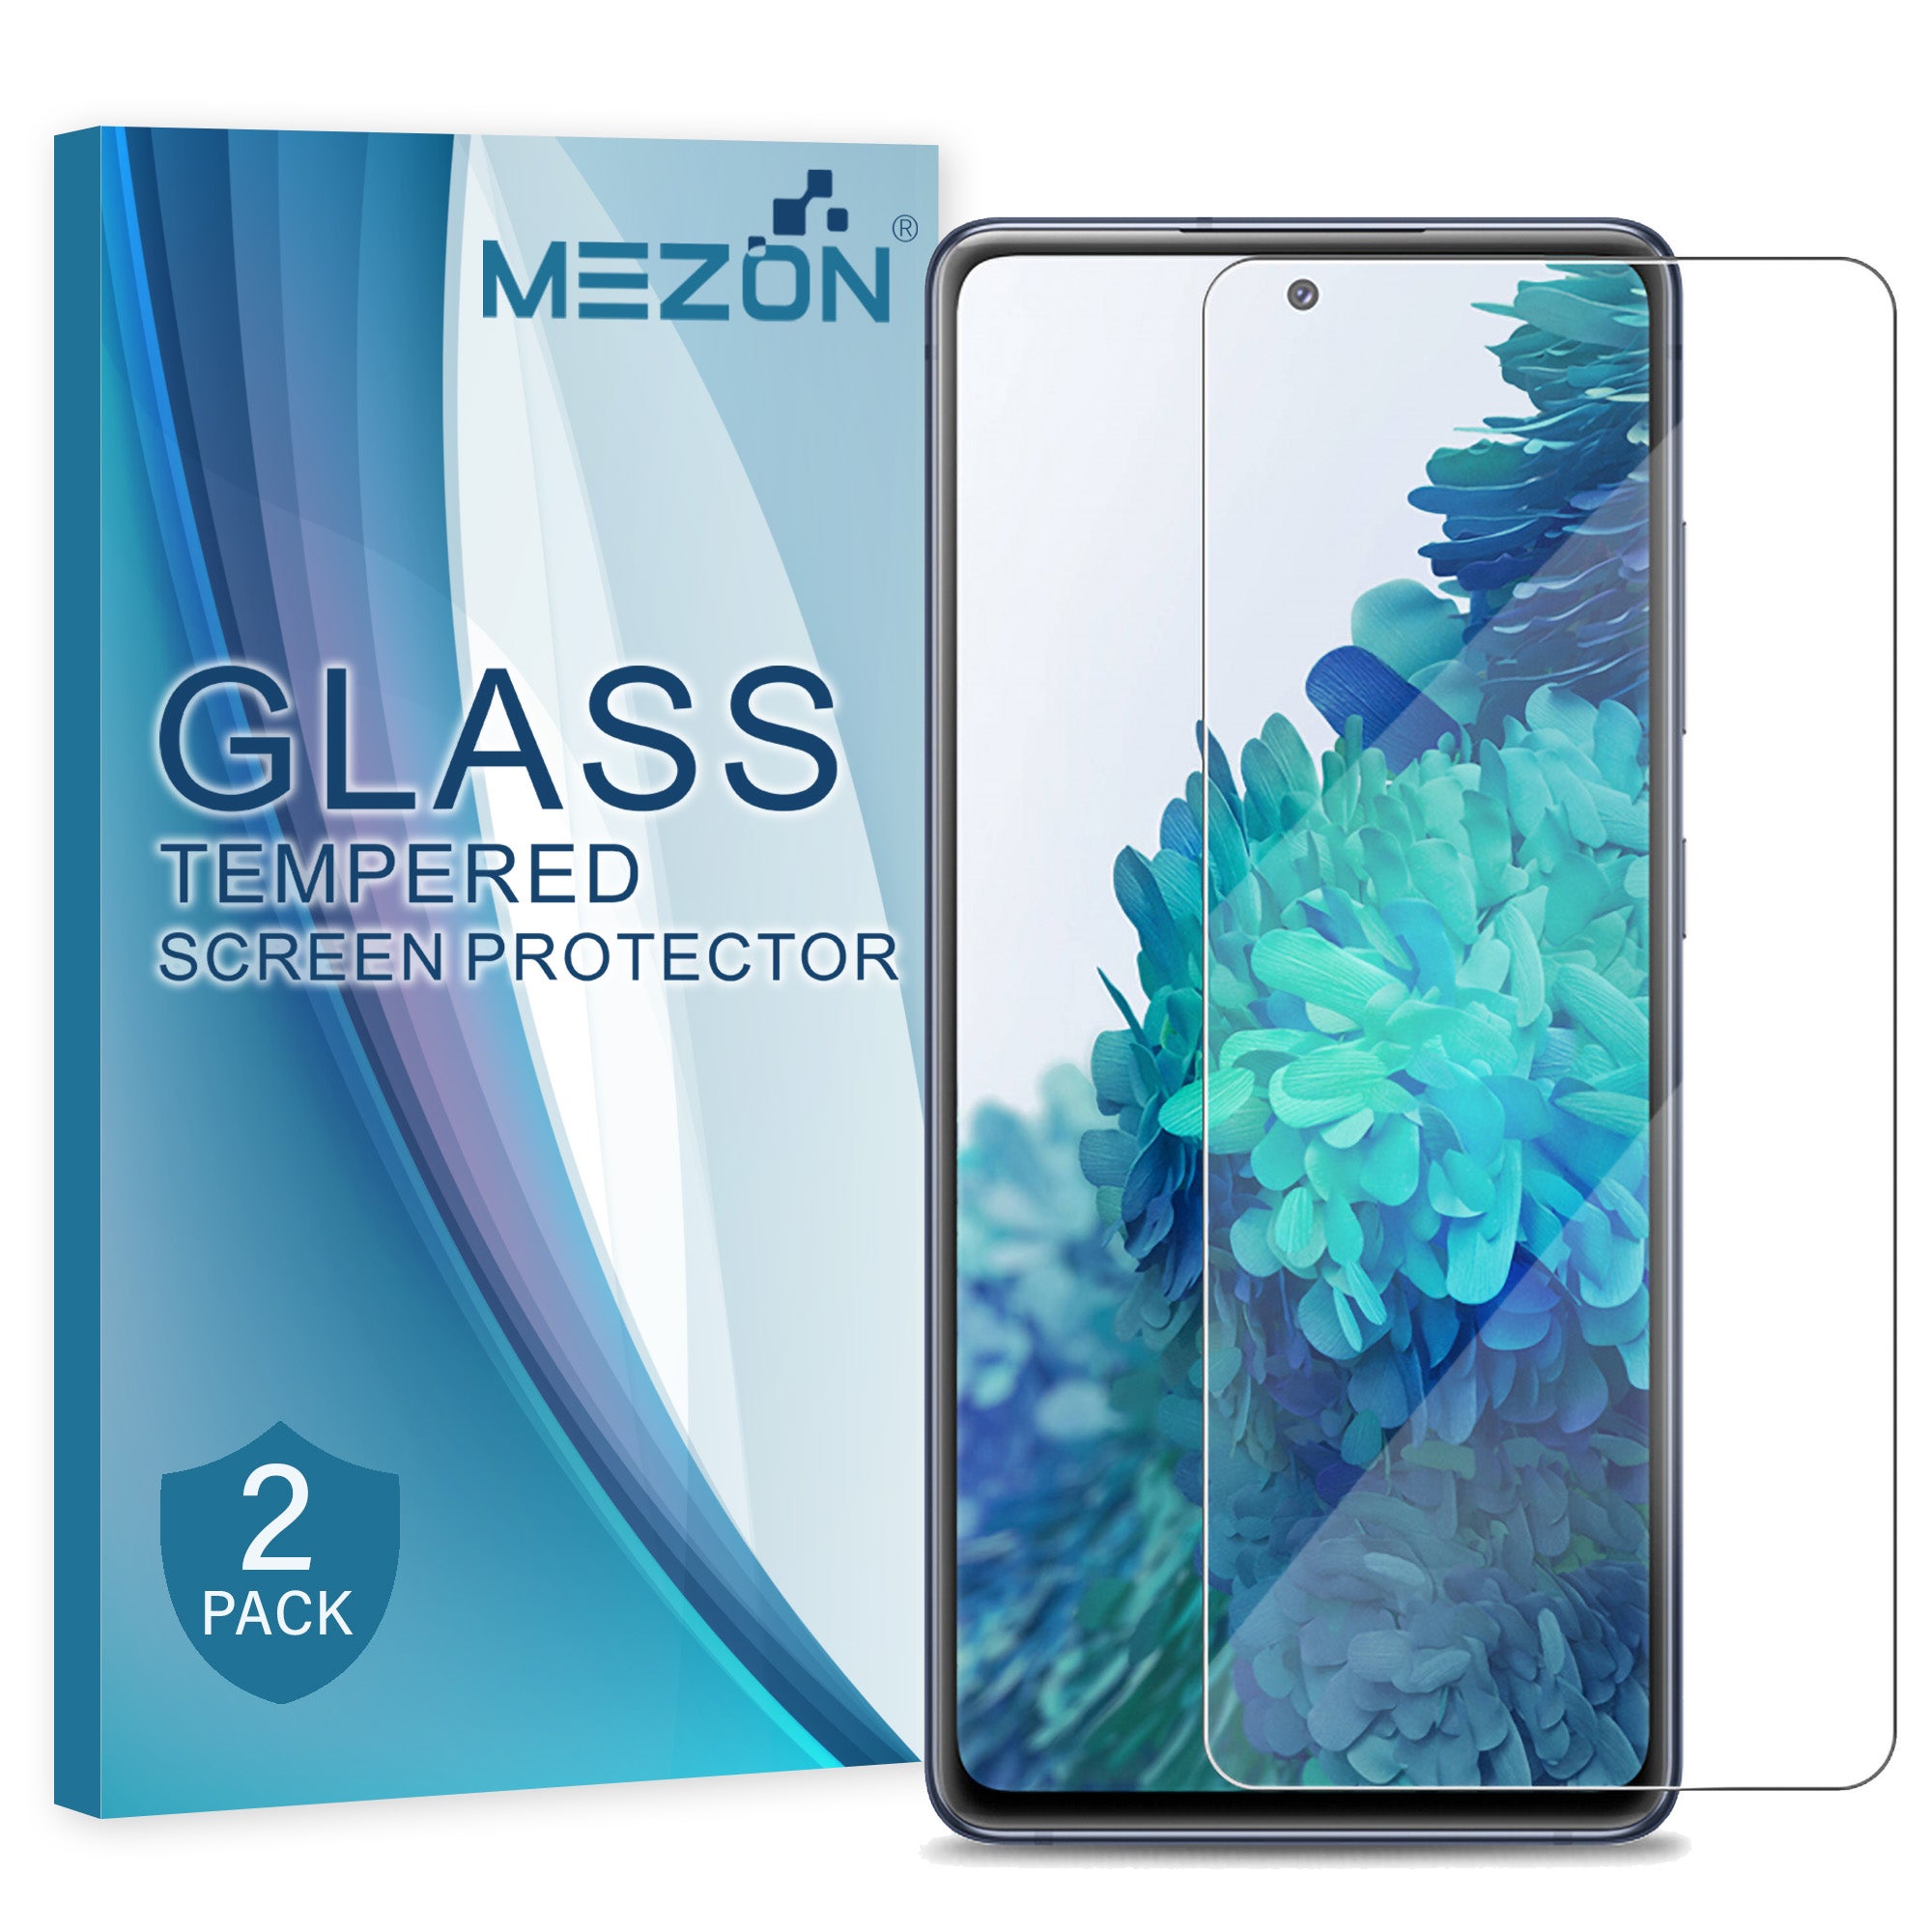 [2 Pack] Samsung Galaxy S20 FE Tempered Glass Crystal Clear Premium 9H HD Screen Protector by MEZON – Case Friendly, Shock Absorption (S20 FE, 9H)